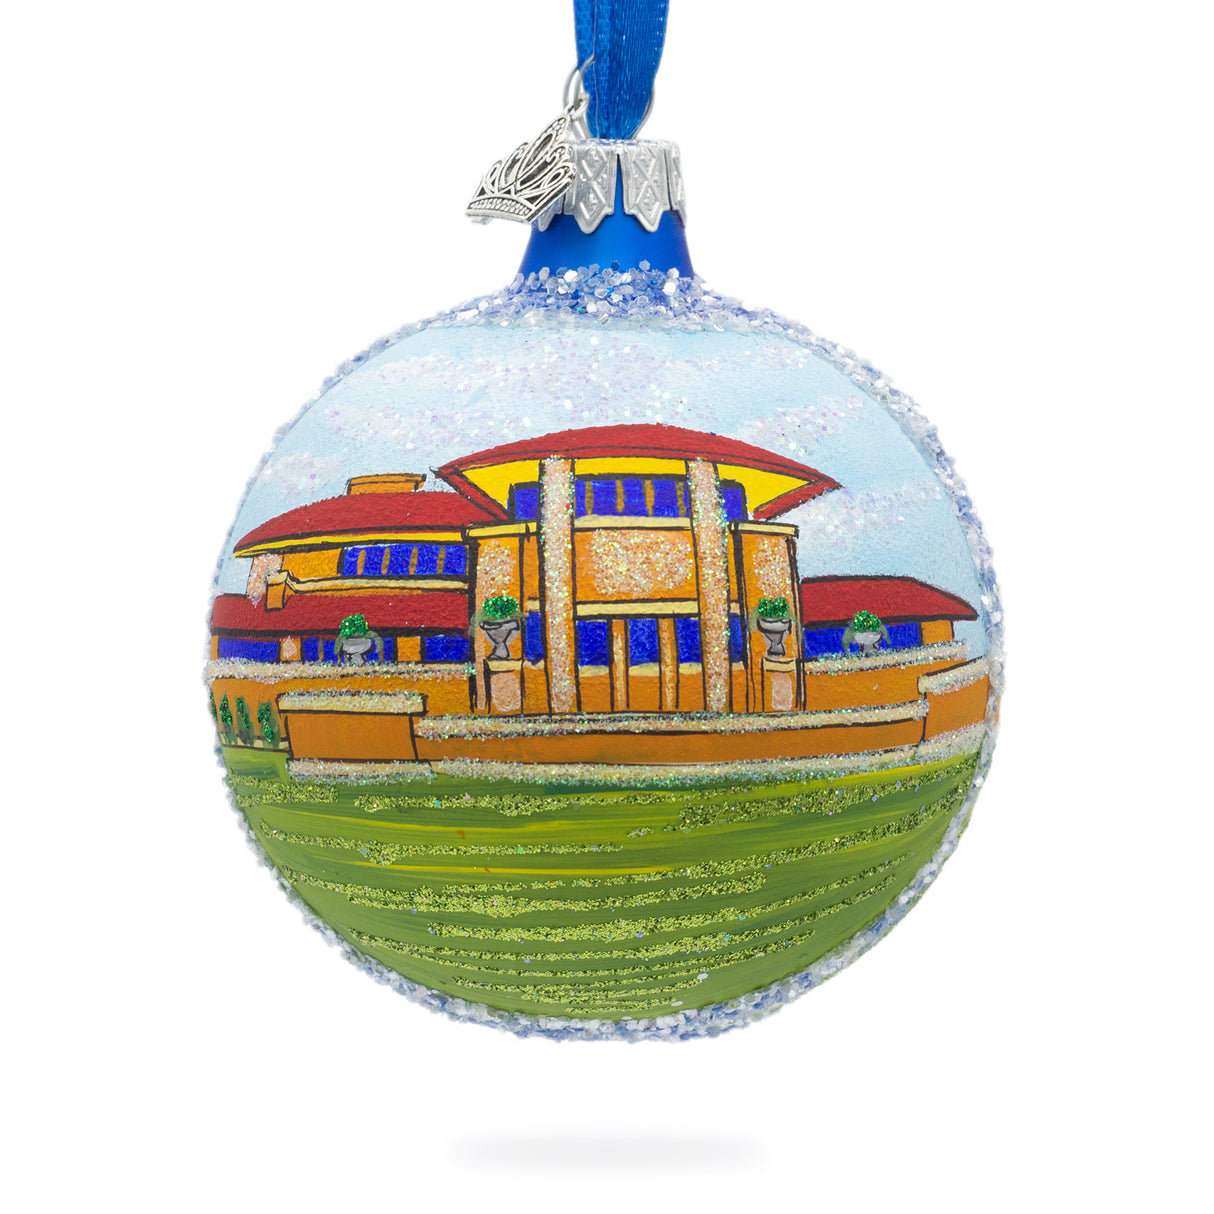 Glass Frank Lloyd Wright's Martin House, Buffalo, New York, USA Glass Ball Christmas Ornament 3.25 Inches in Multi color Round